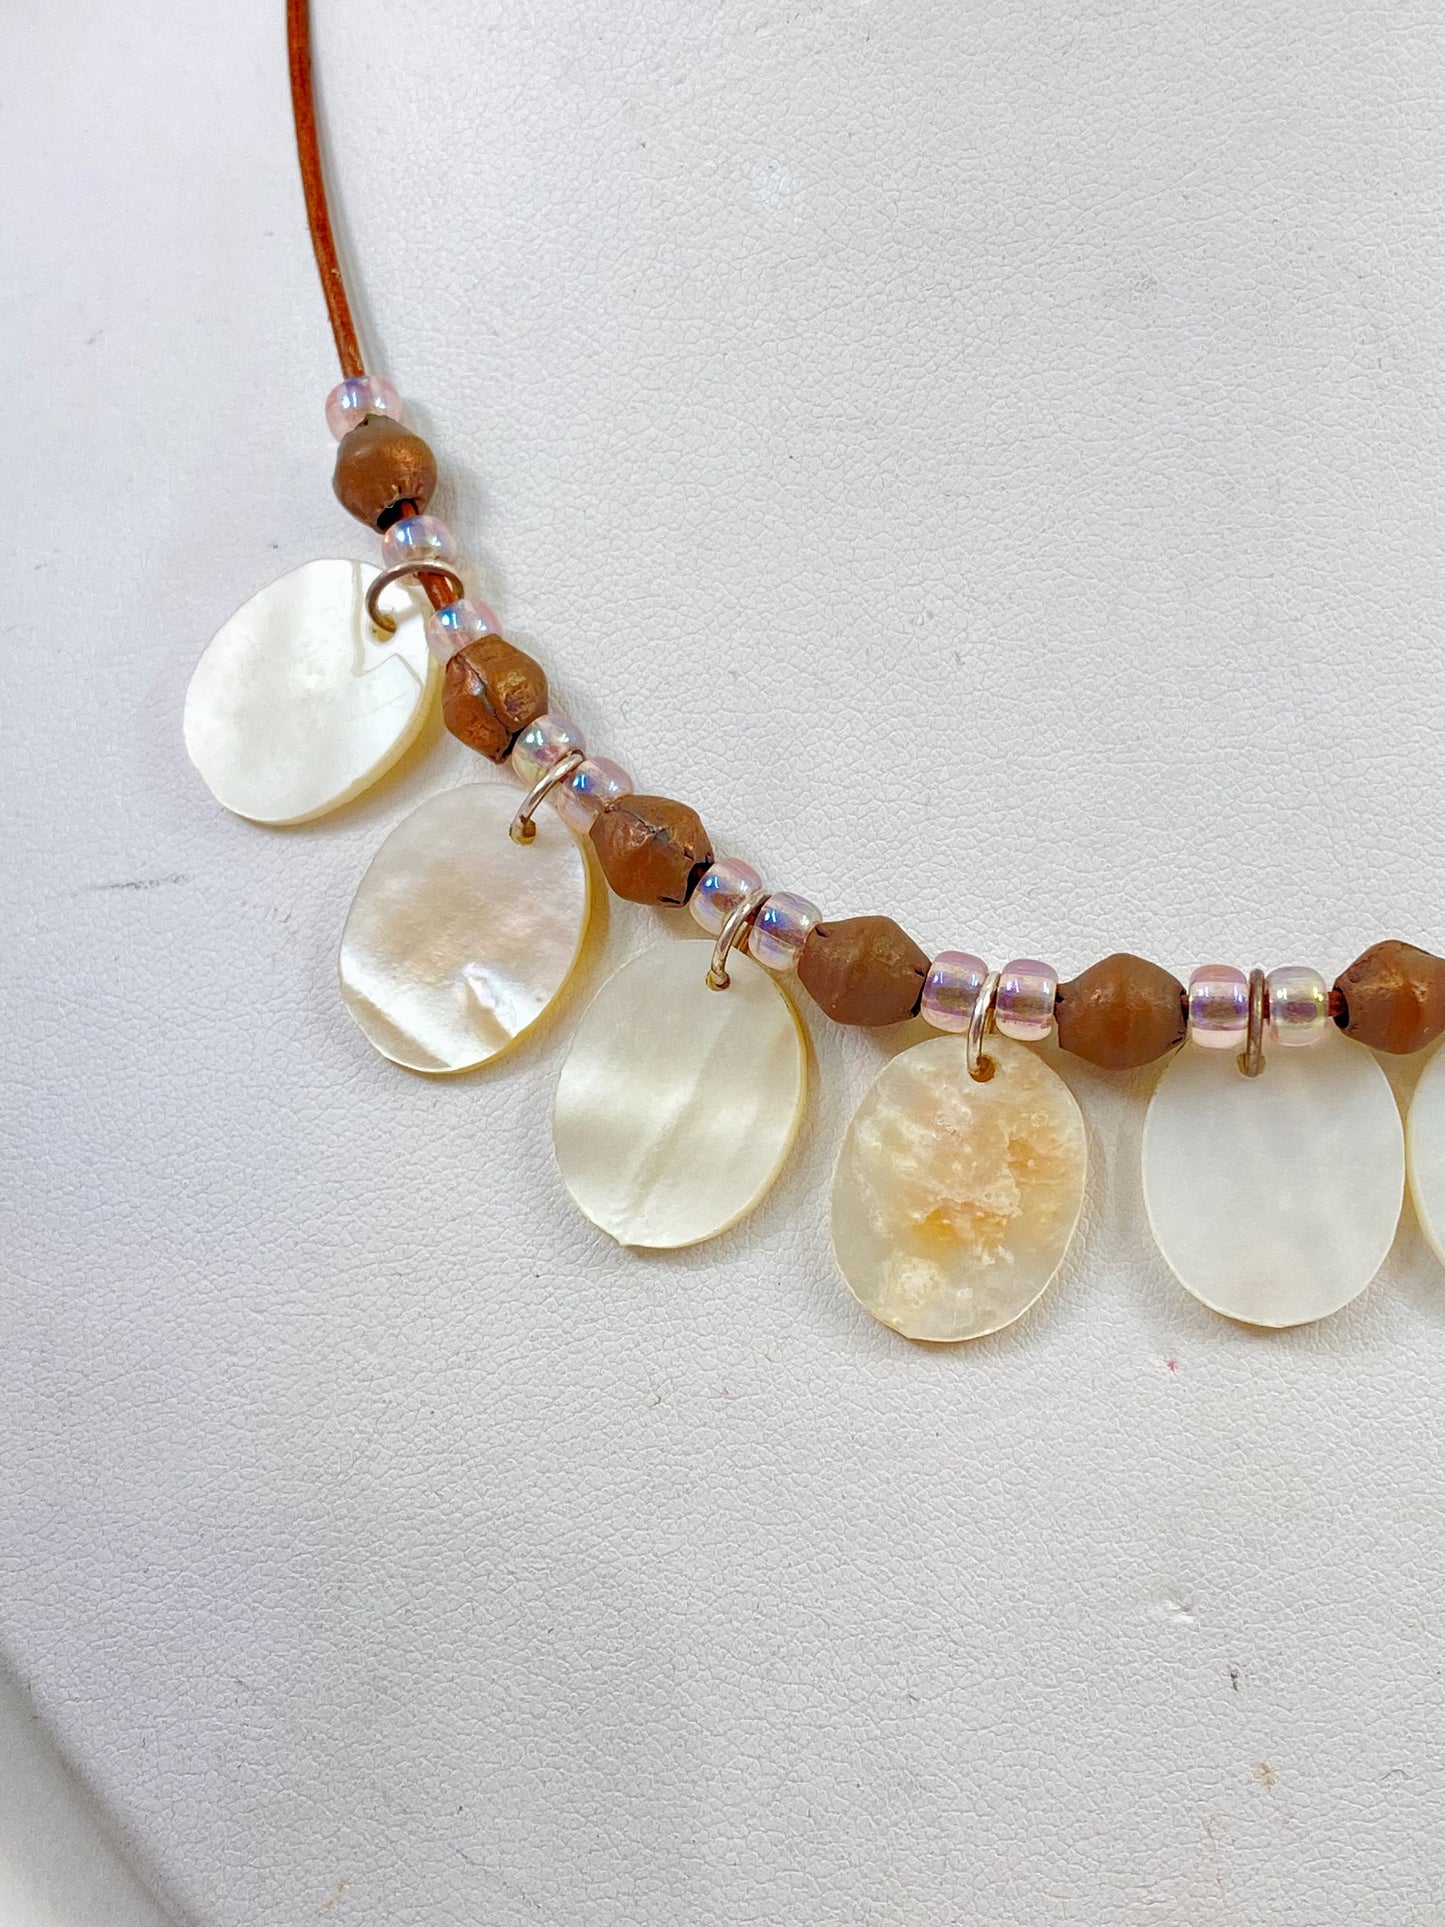 Leather Necklace. Striking Mother of Pearl and African brass prayer beads strung on soft dark brown Italian leather. Finished with a sterling silver clasp.